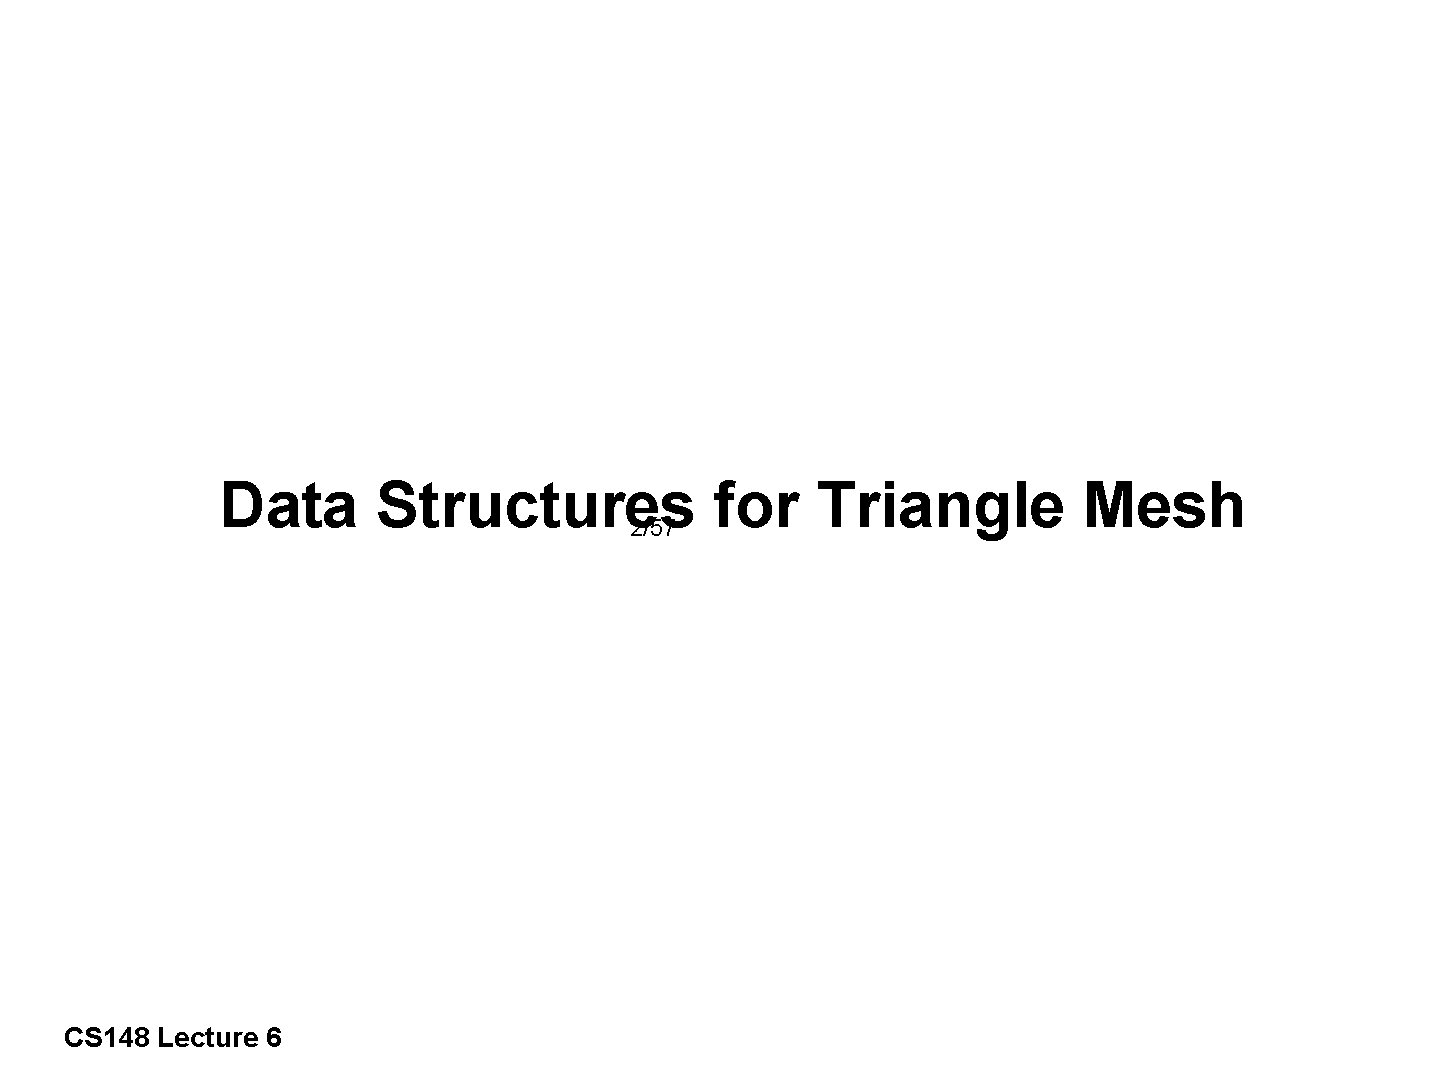 Data Structures for Triangle Mesh 2/57 CS 148 Lecture 6 